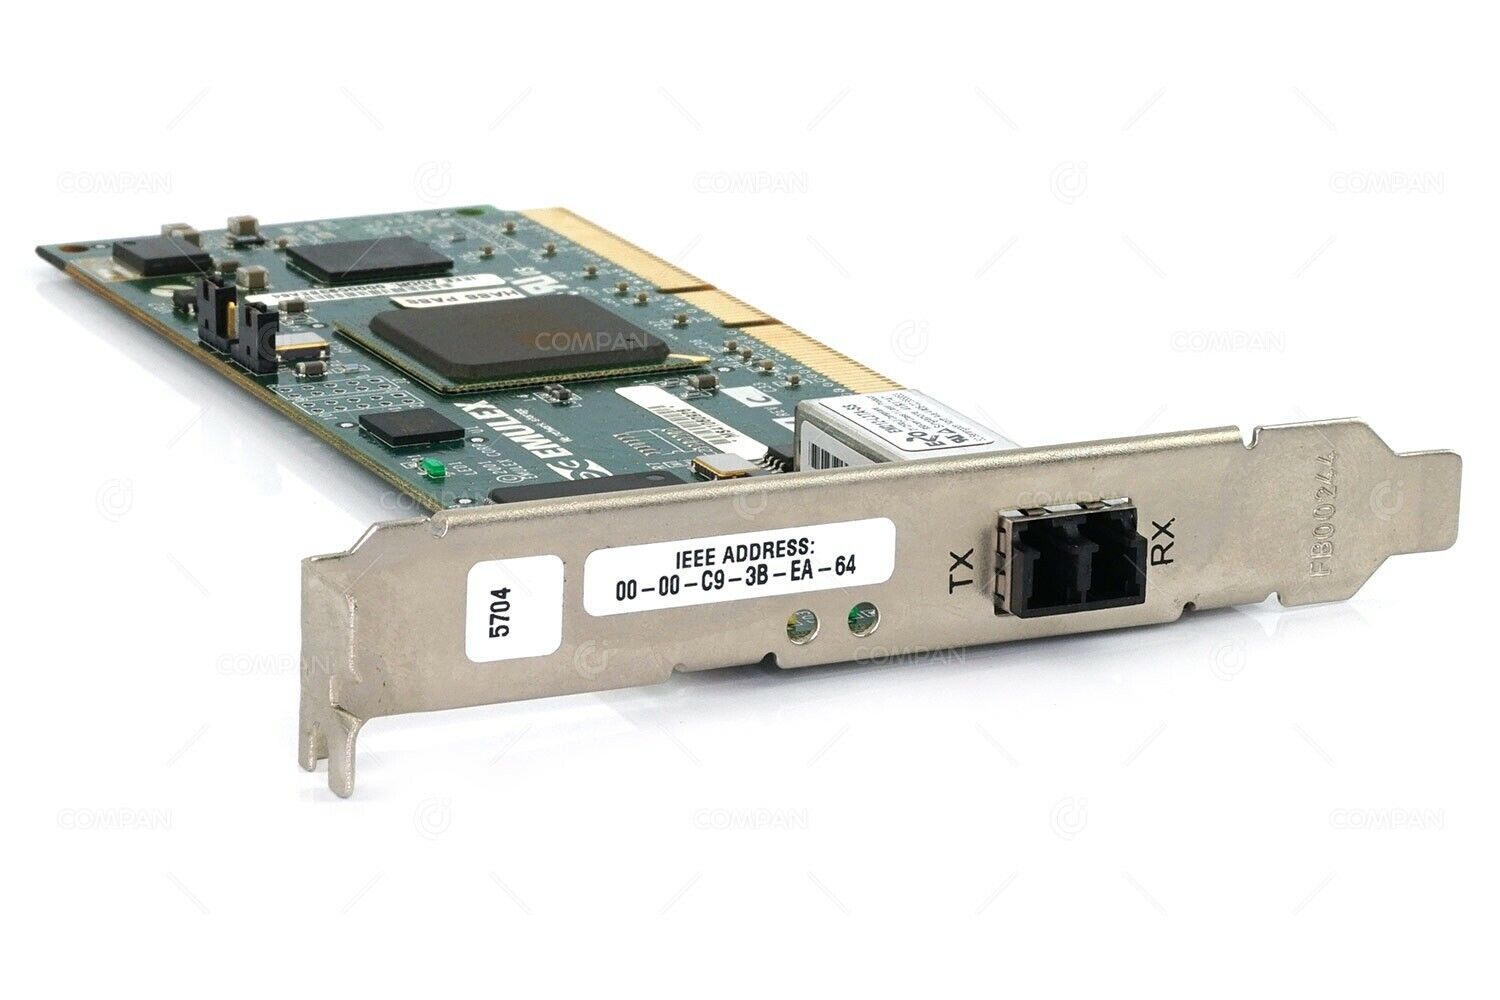 5704 IBM PCI-X 2GB FC ADAPTER FOR IBM POWER SYSTEMS 00P4297, 80P6416, 00P4295, 